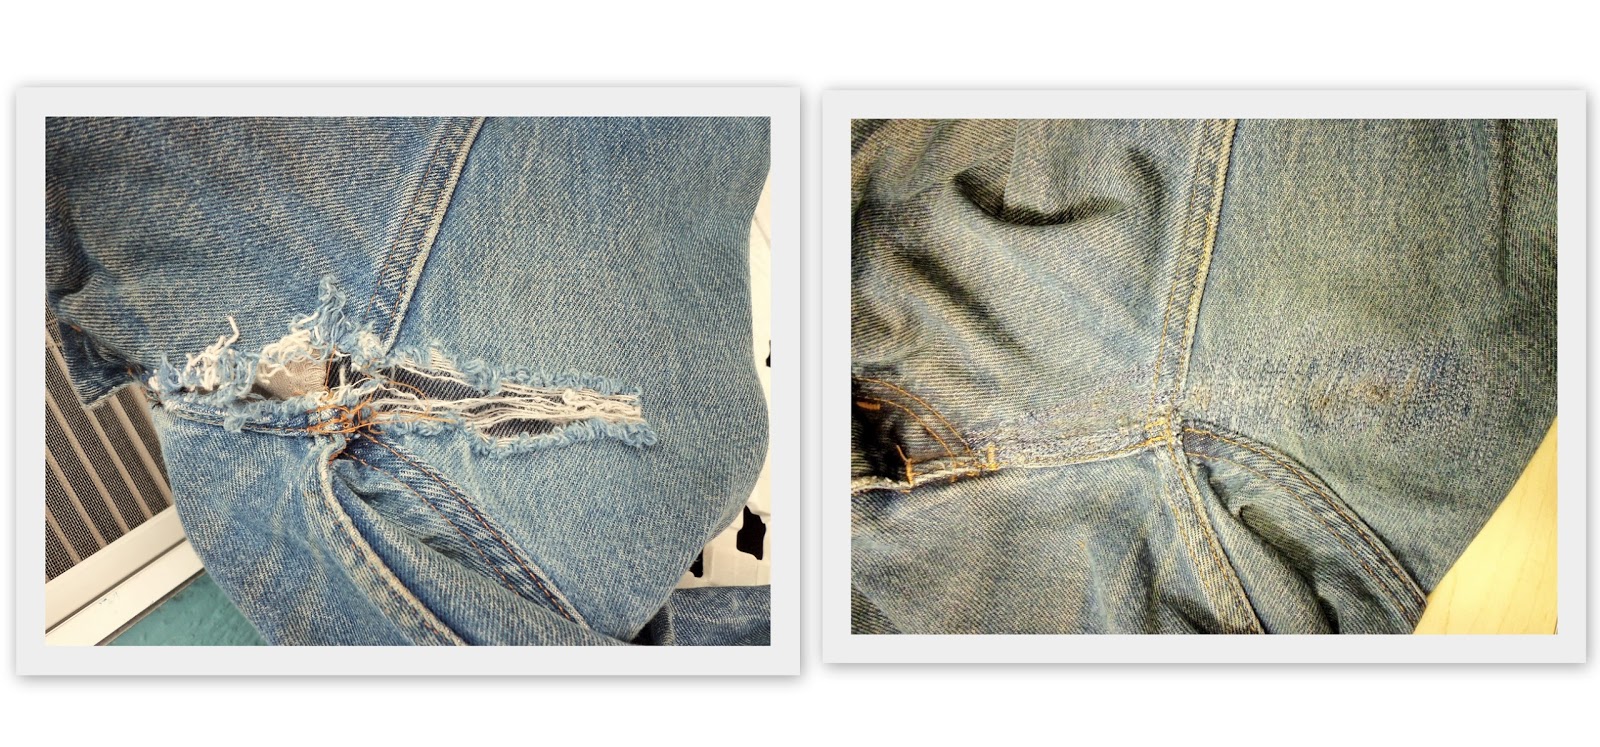 Make The Best of Things: You CAN Repair Your Blue Jeans!